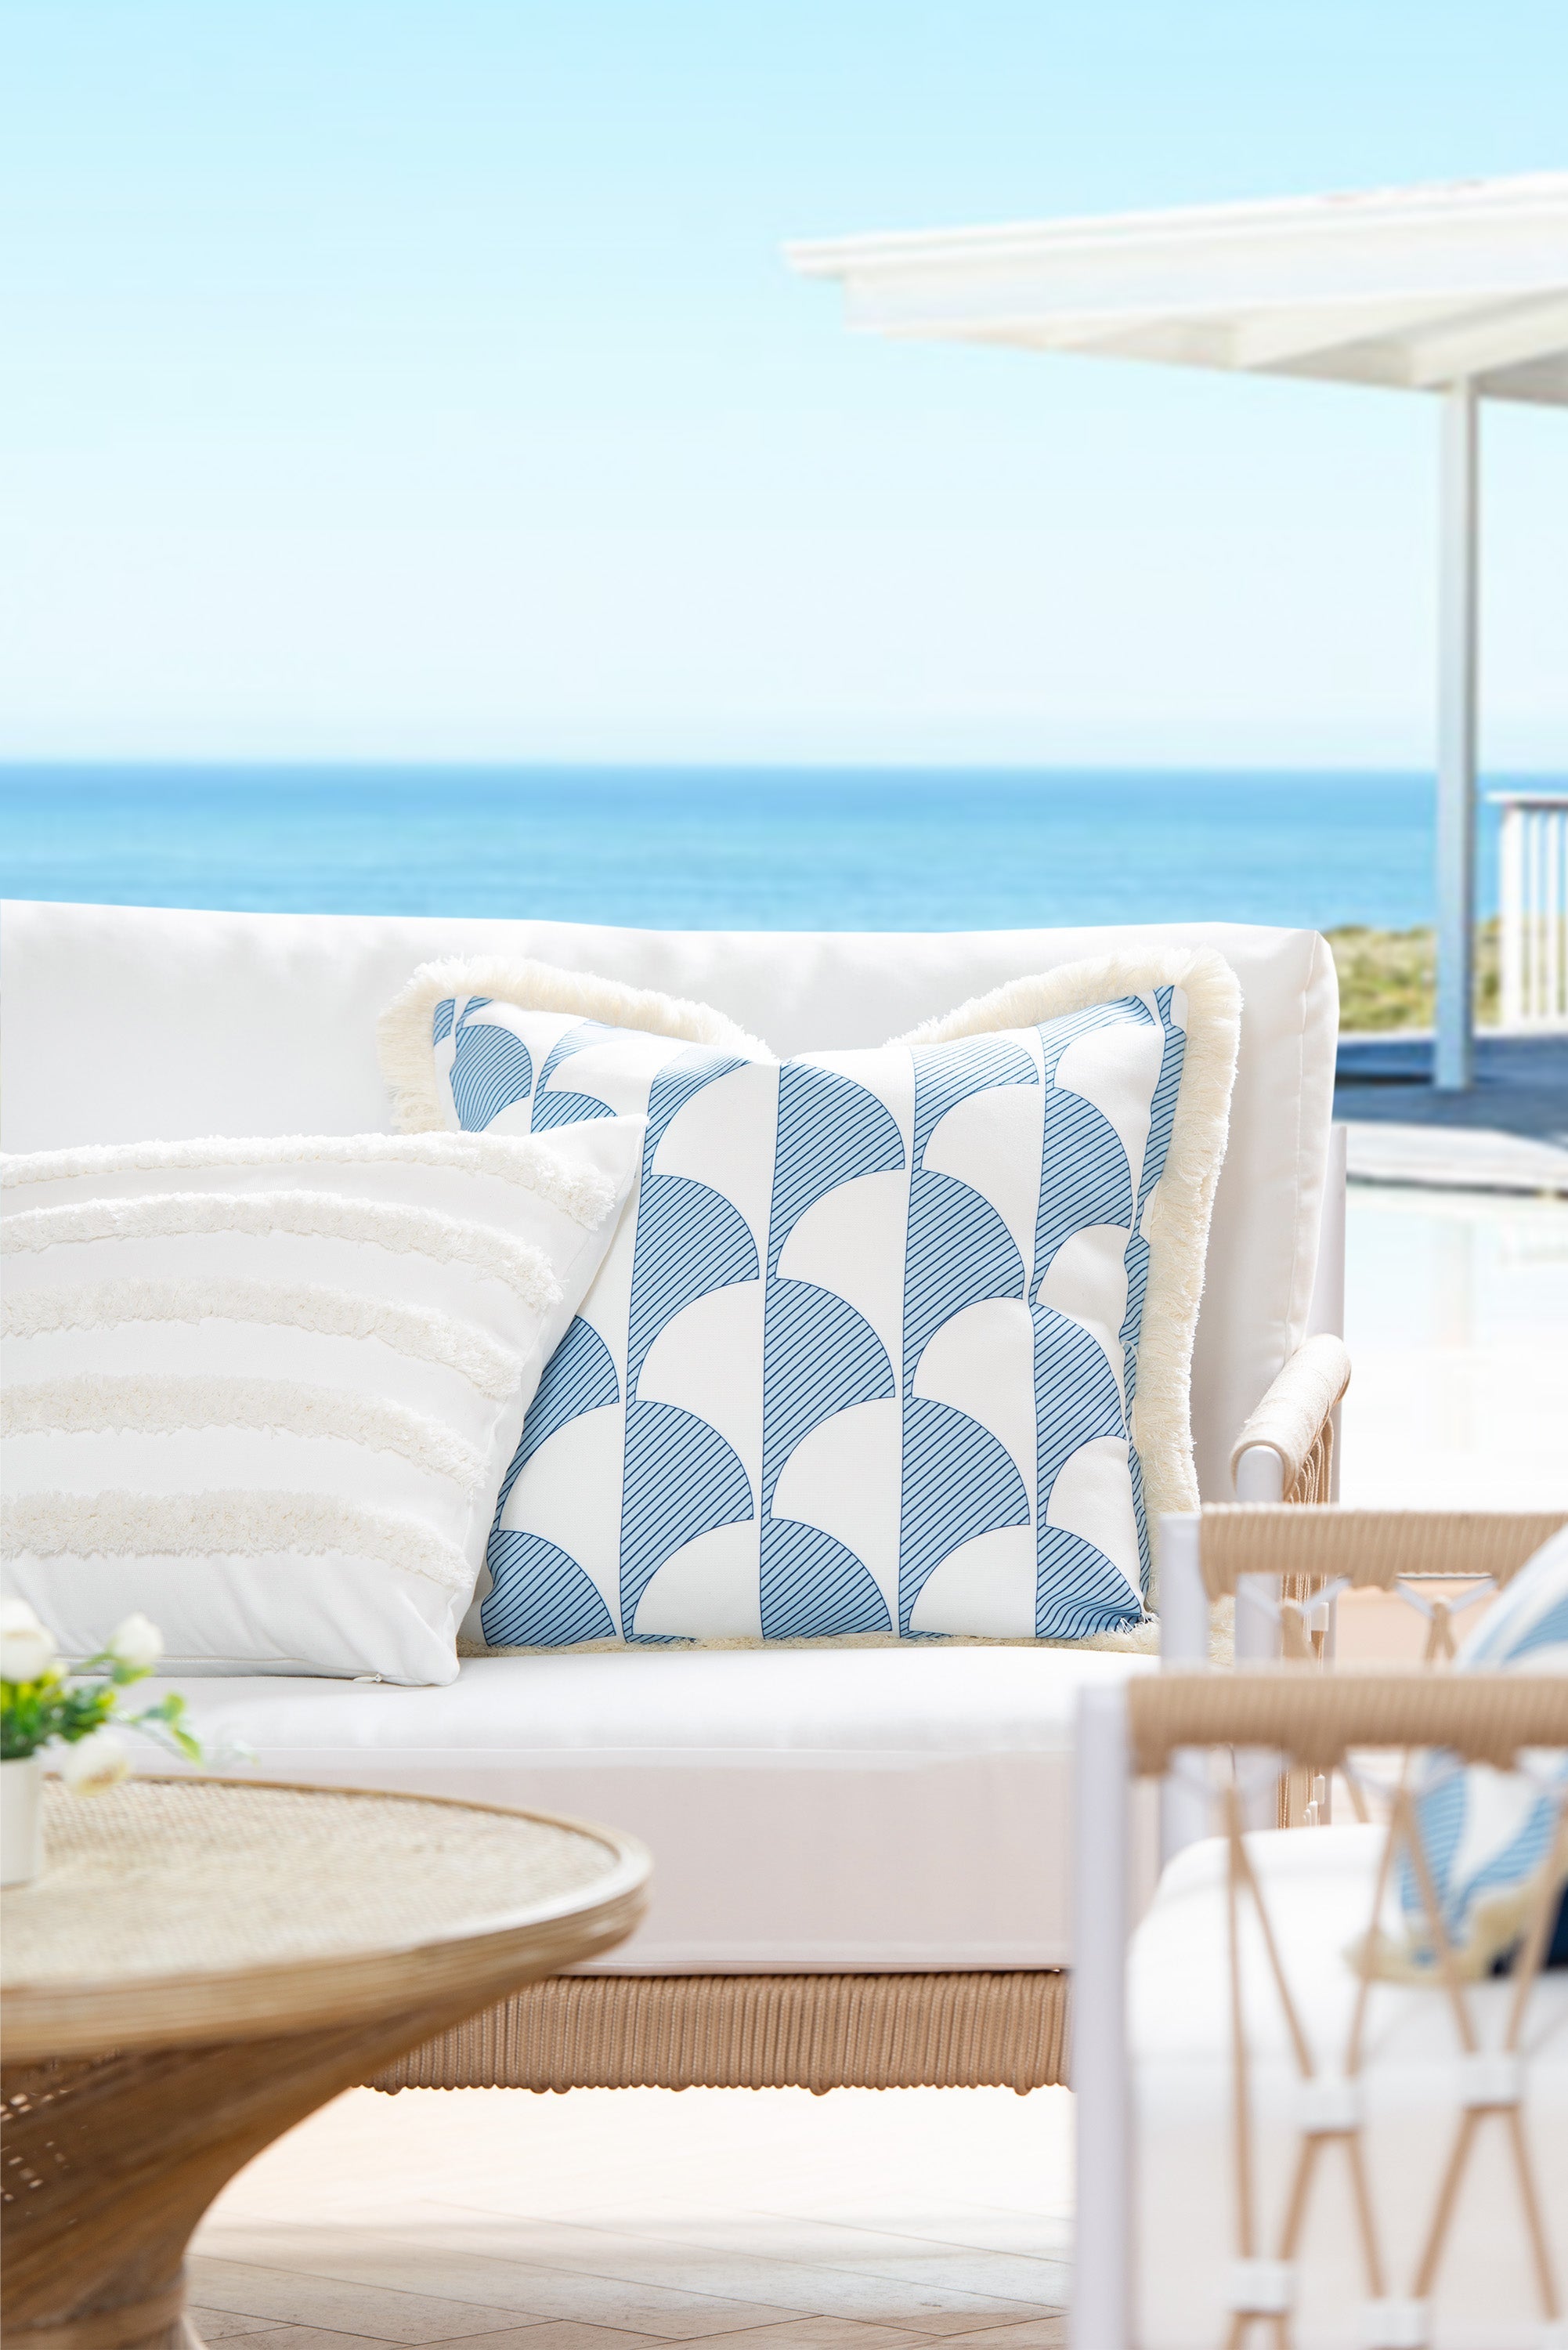 Coastal Hampton Style Indoor Outdoor Pillow Cover, Scale Motif Fringe, Baby Blue, 20"x20"-1